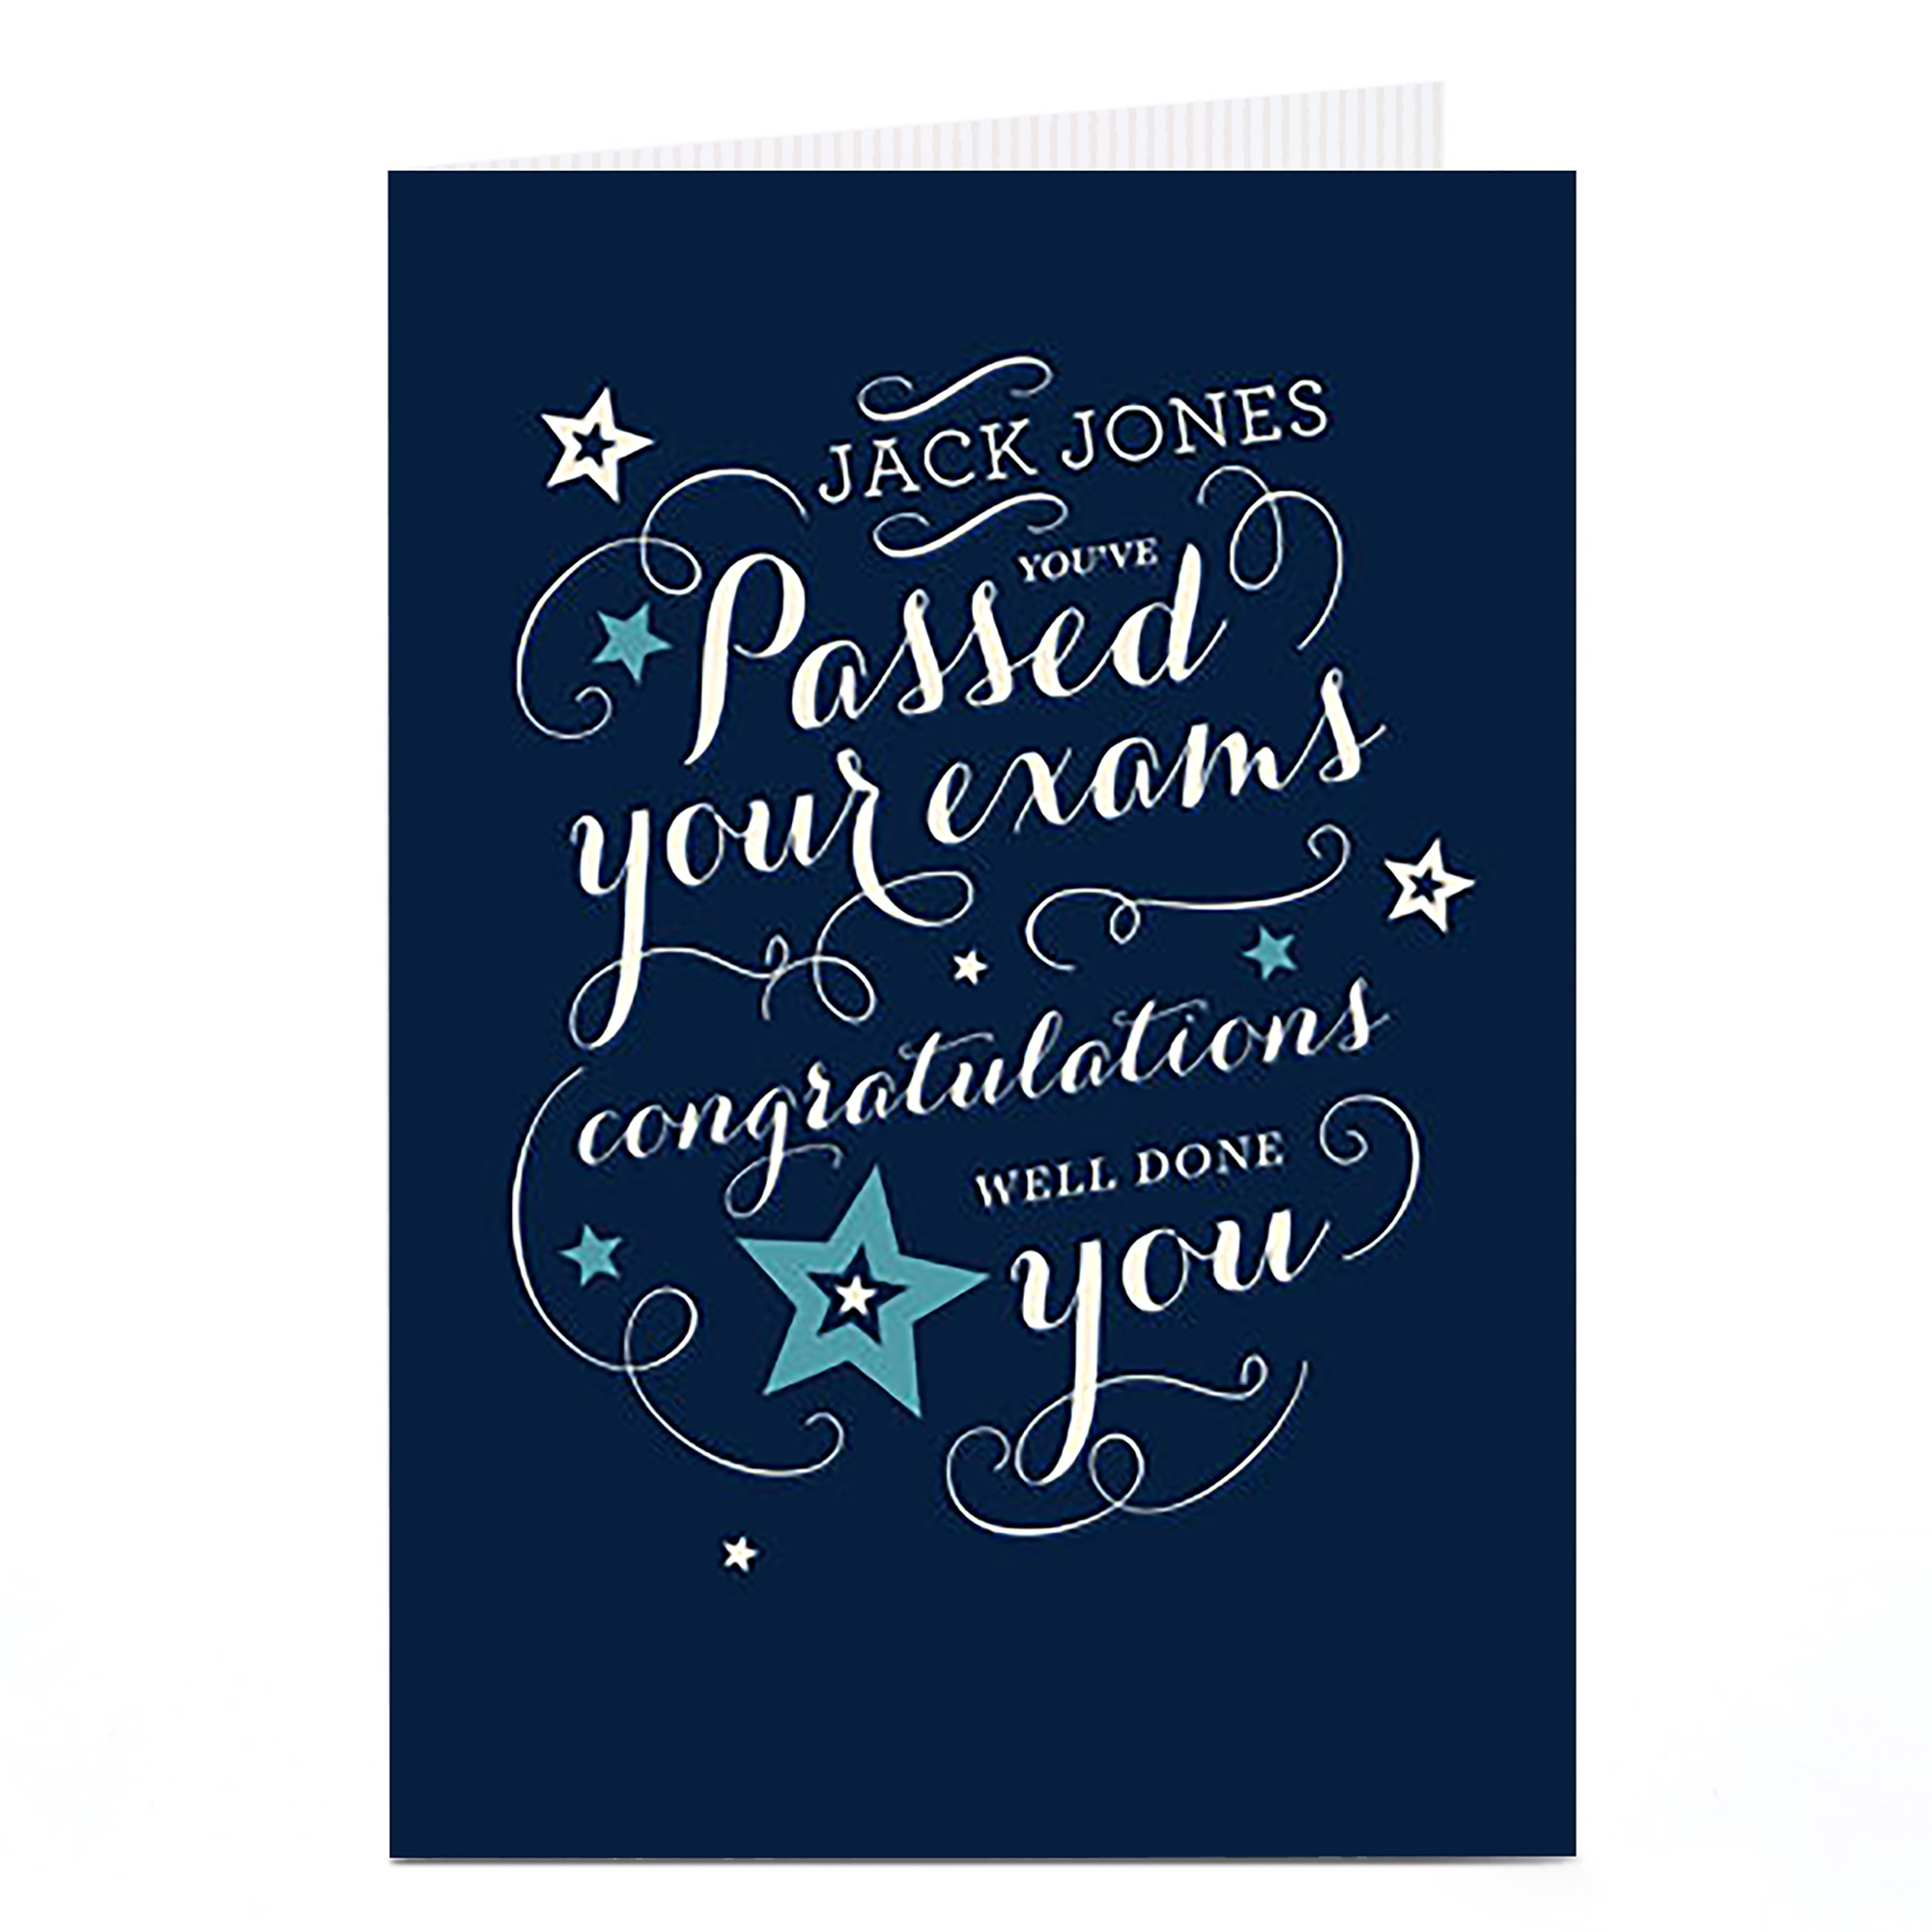 Personalised Congratulations Card - You've Passed Your Exams!